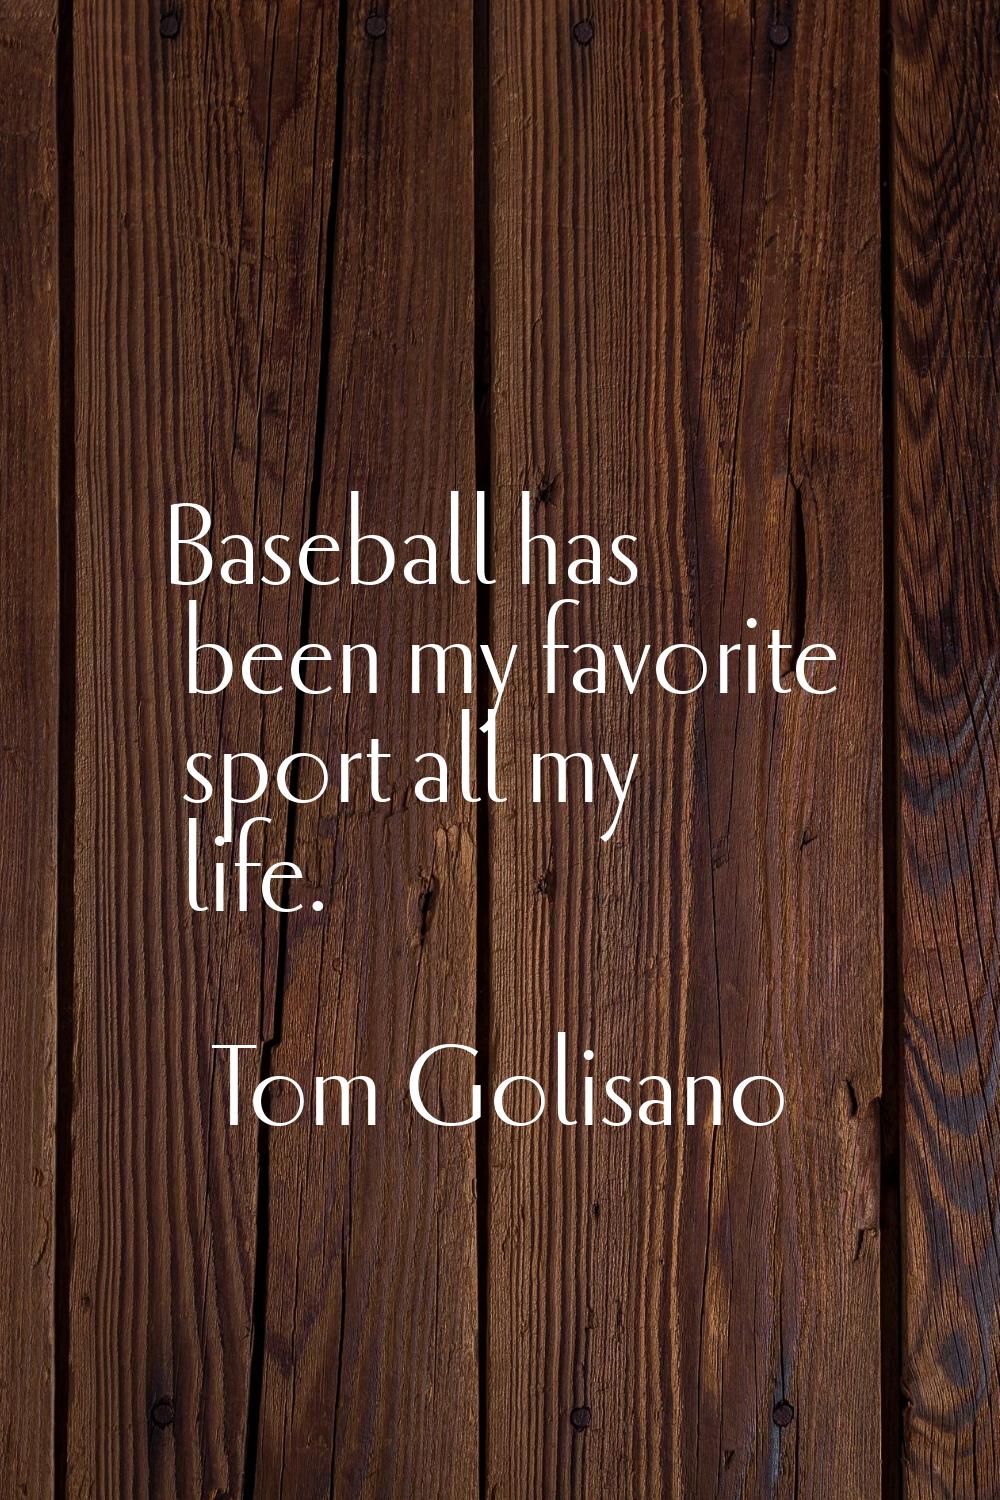 Baseball has been my favorite sport all my life.